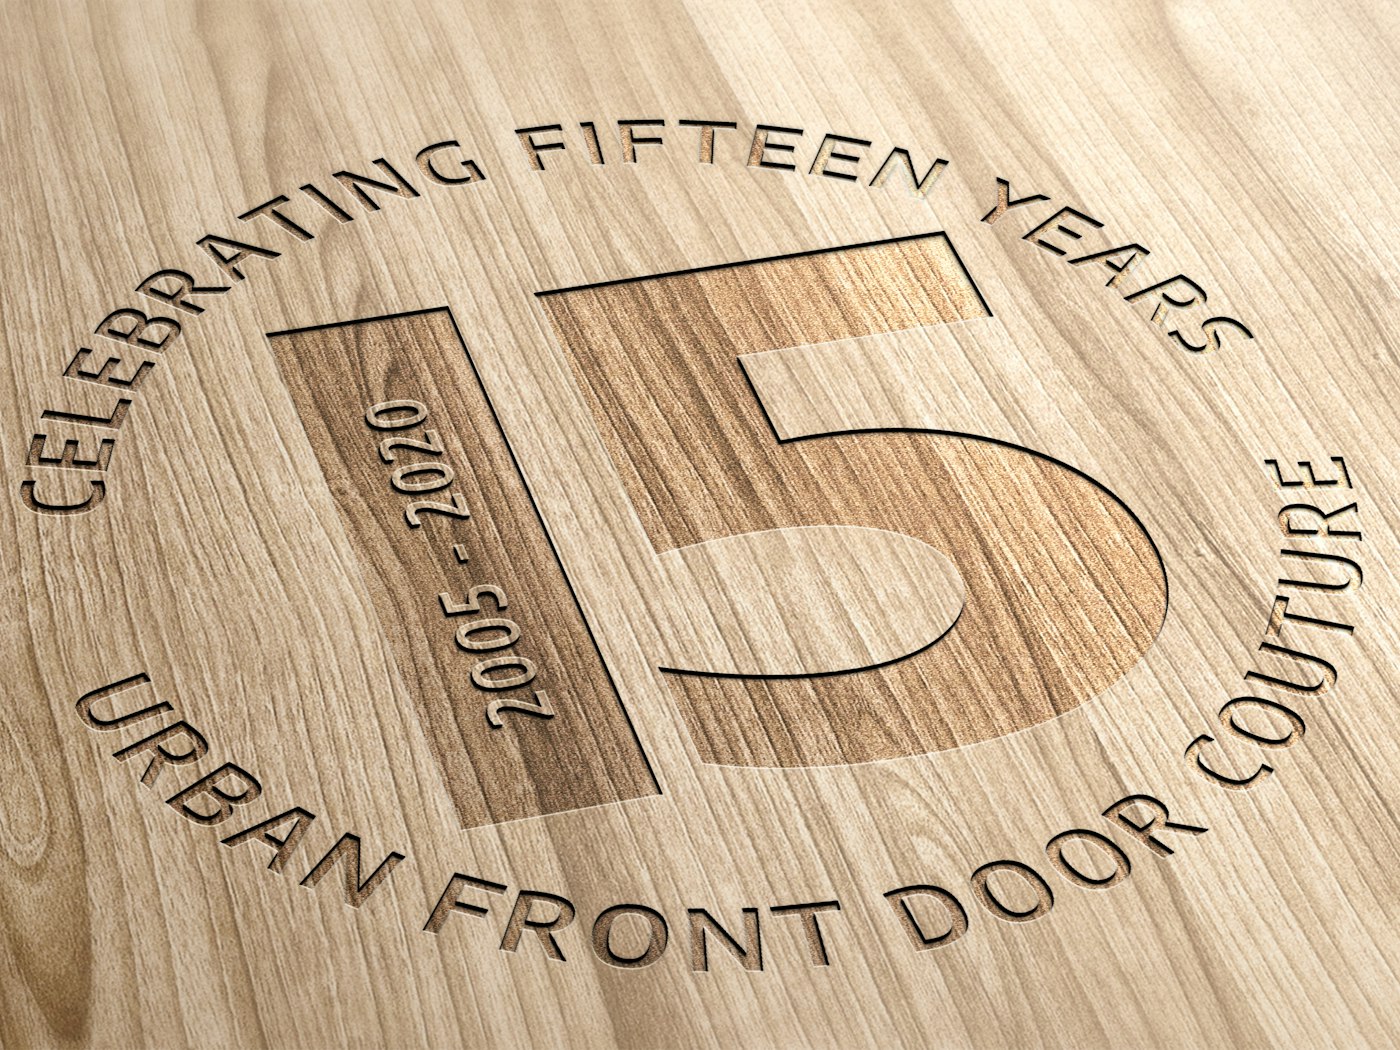 Urban Front 15 years in business